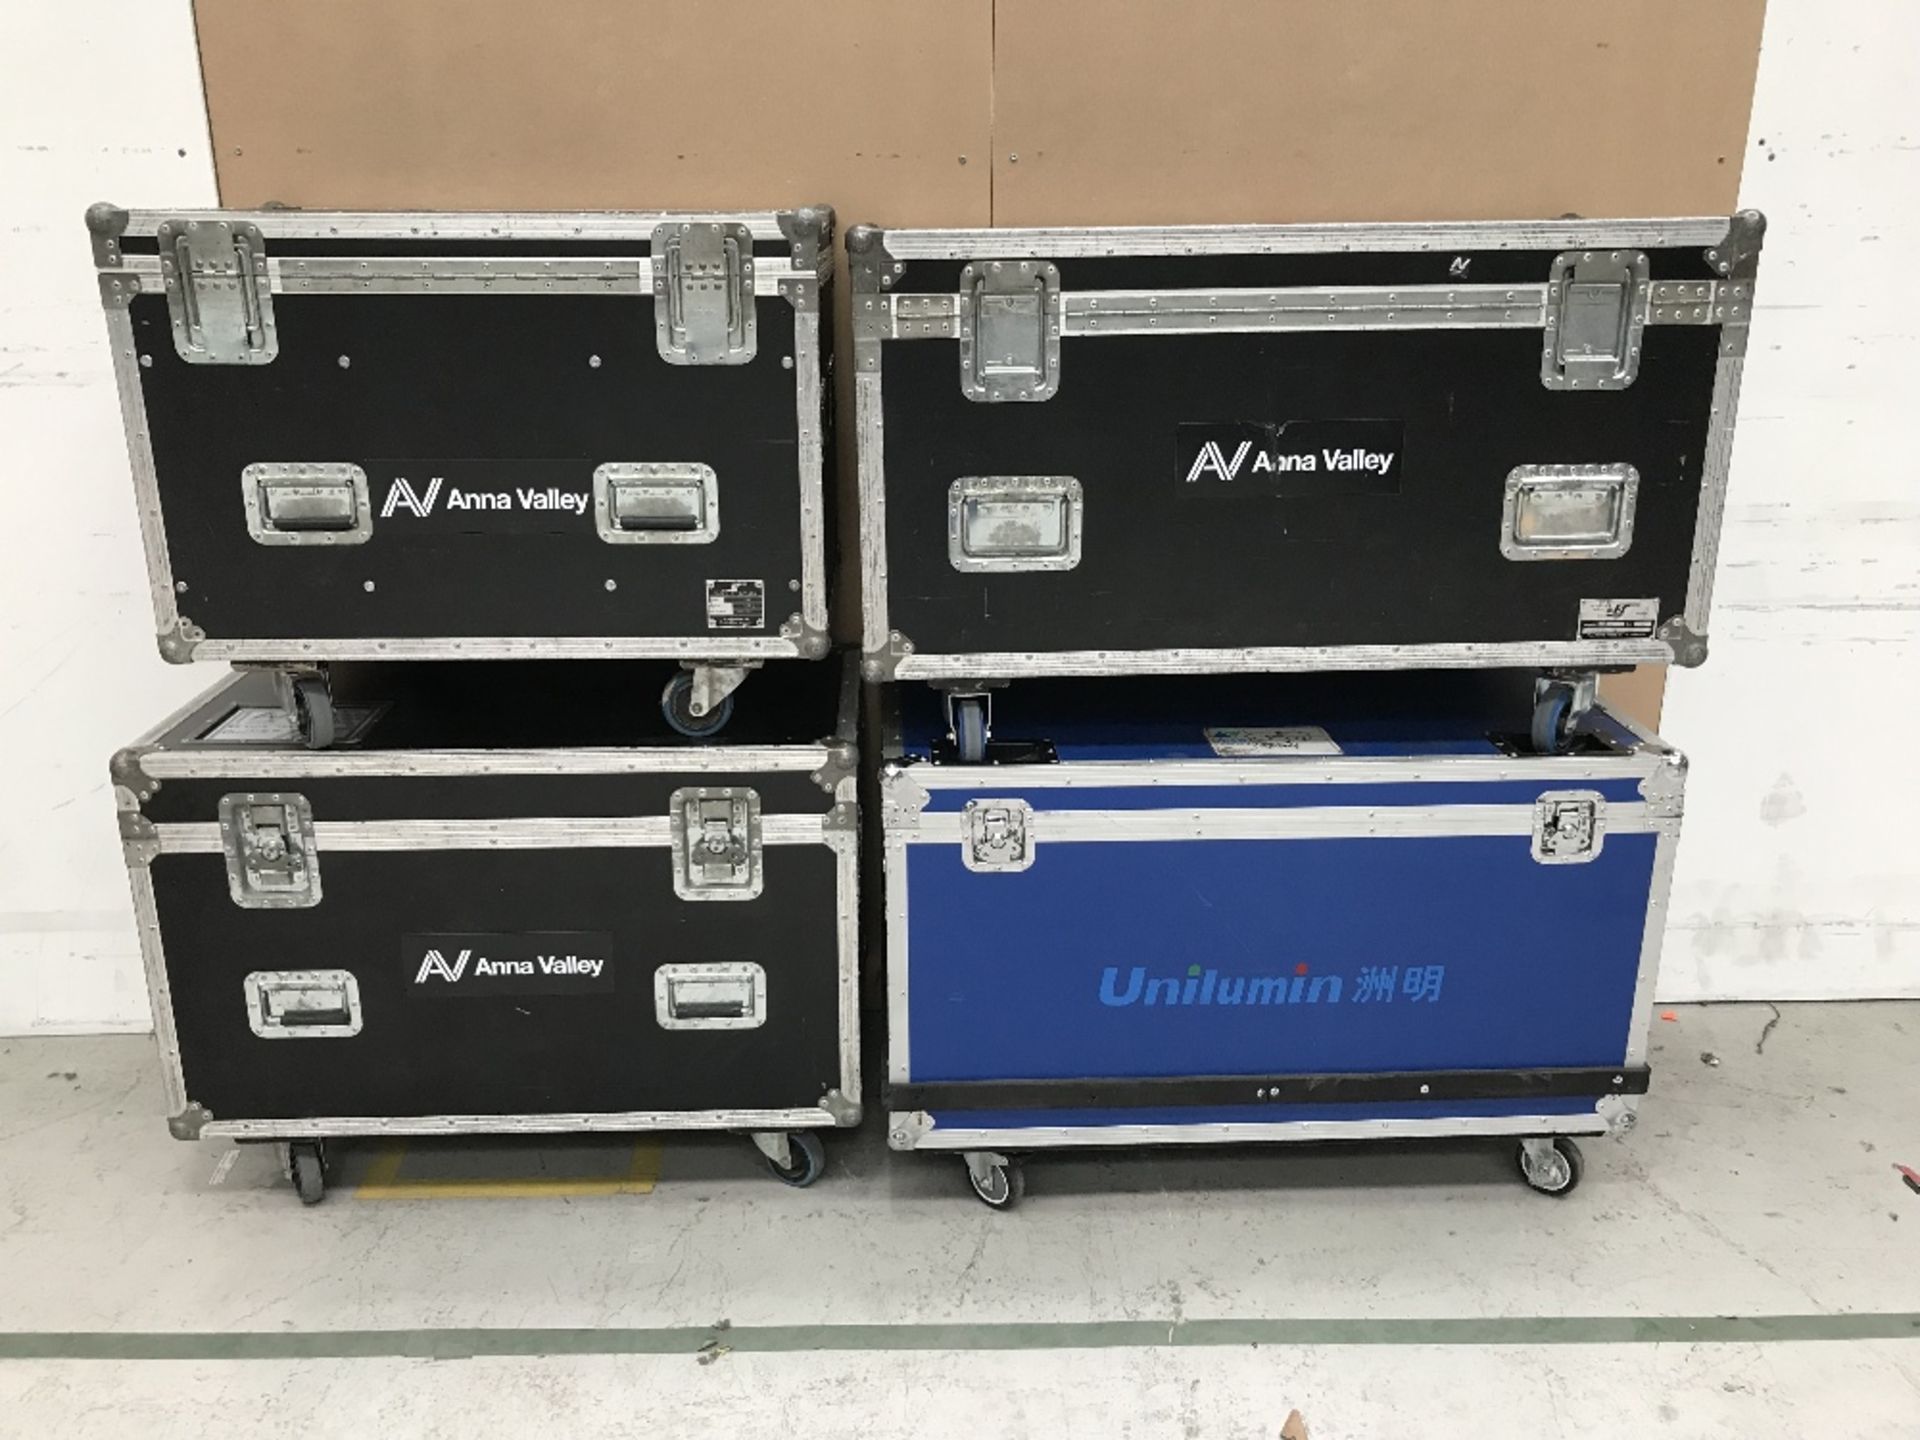 (4) Various Large Mobile Flight Cases